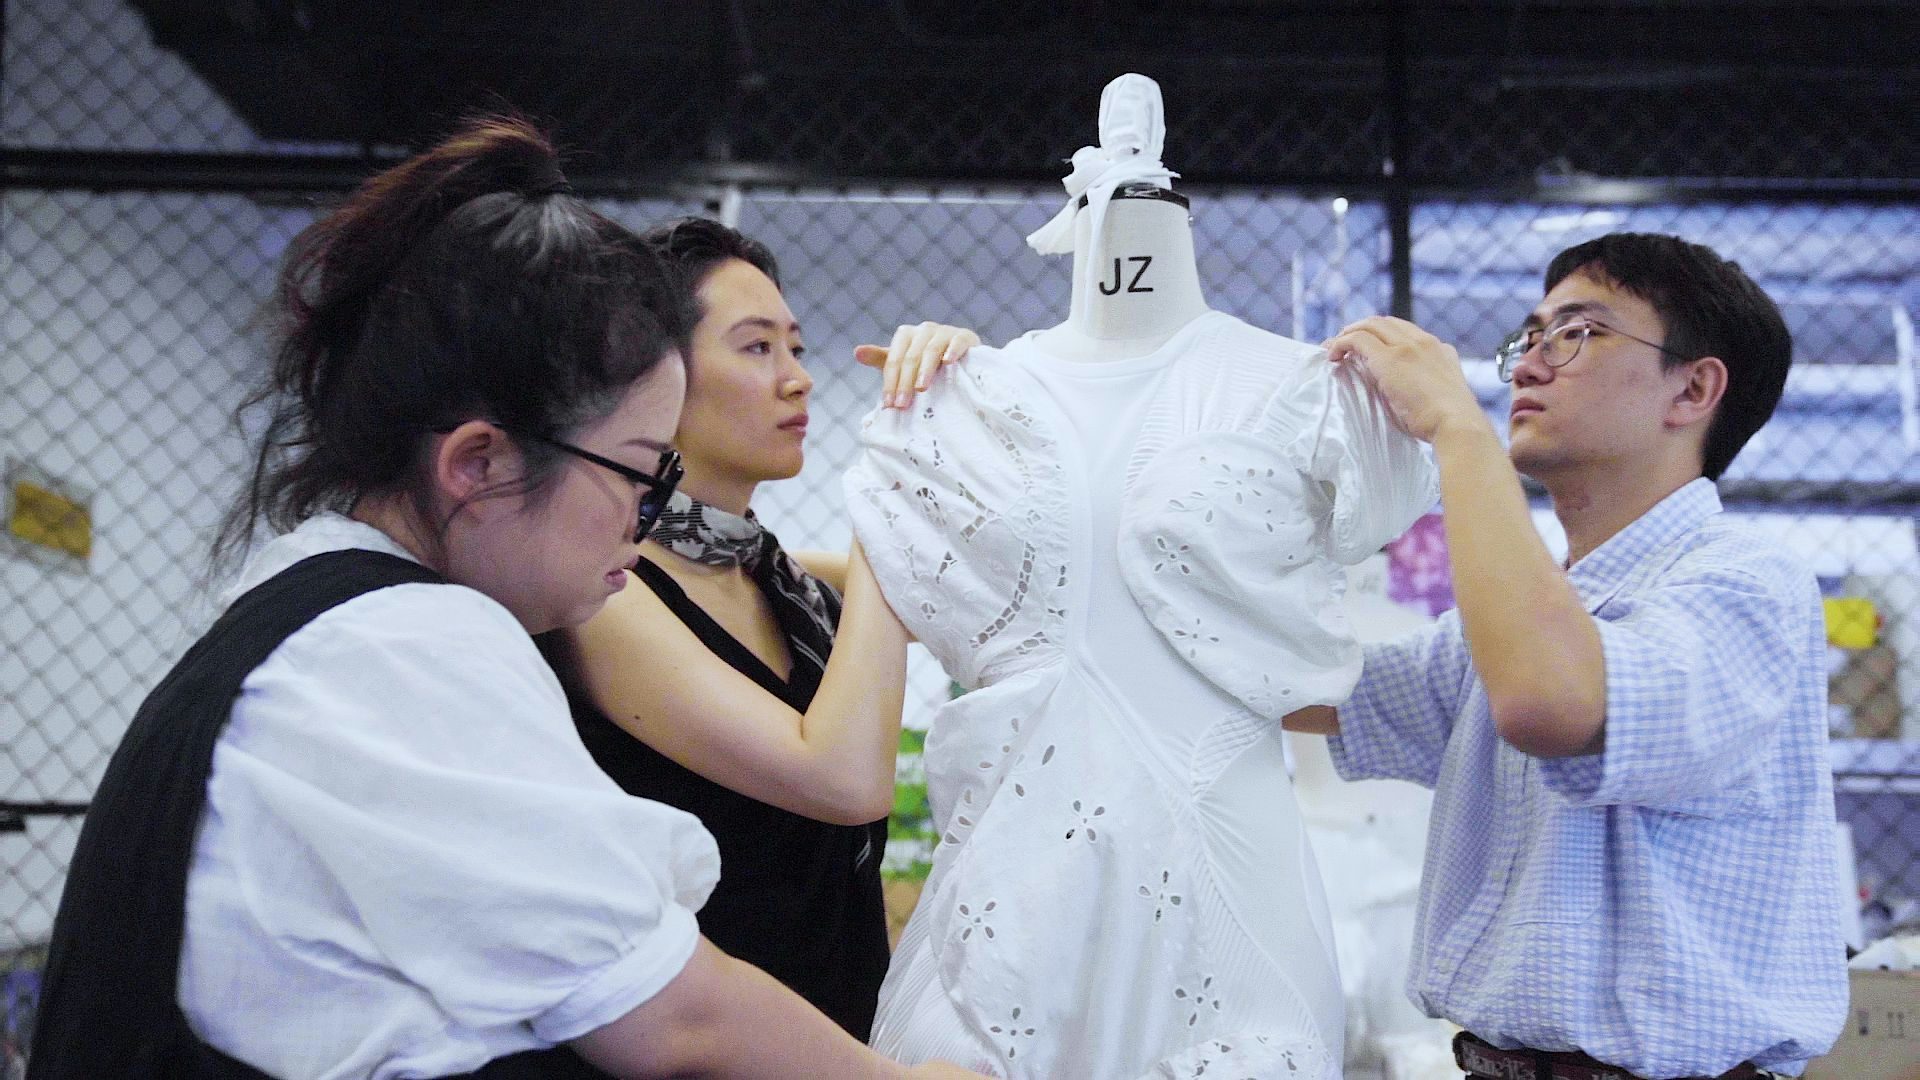 How Can Fashion Fix Its Sustainability Disconnect?